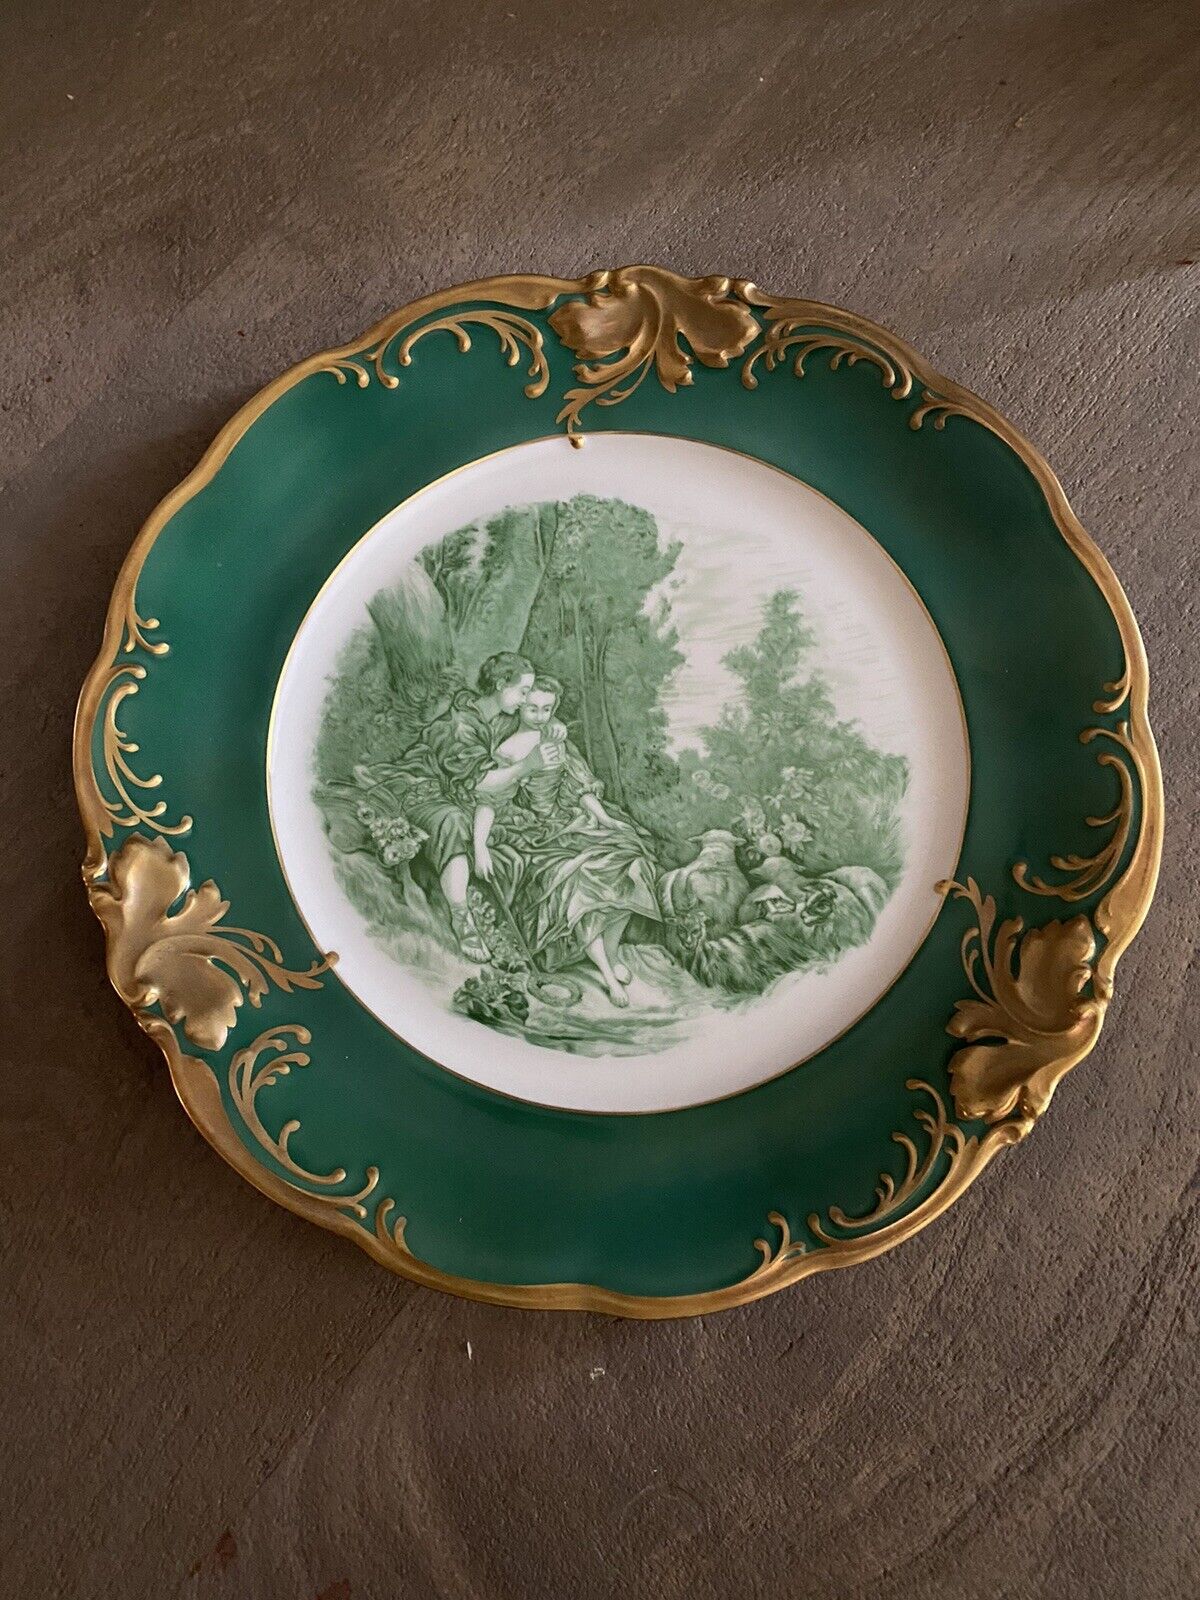 Vintage KPM hand-painted In Austria Porcelain Courting Couple Plate 9.5”